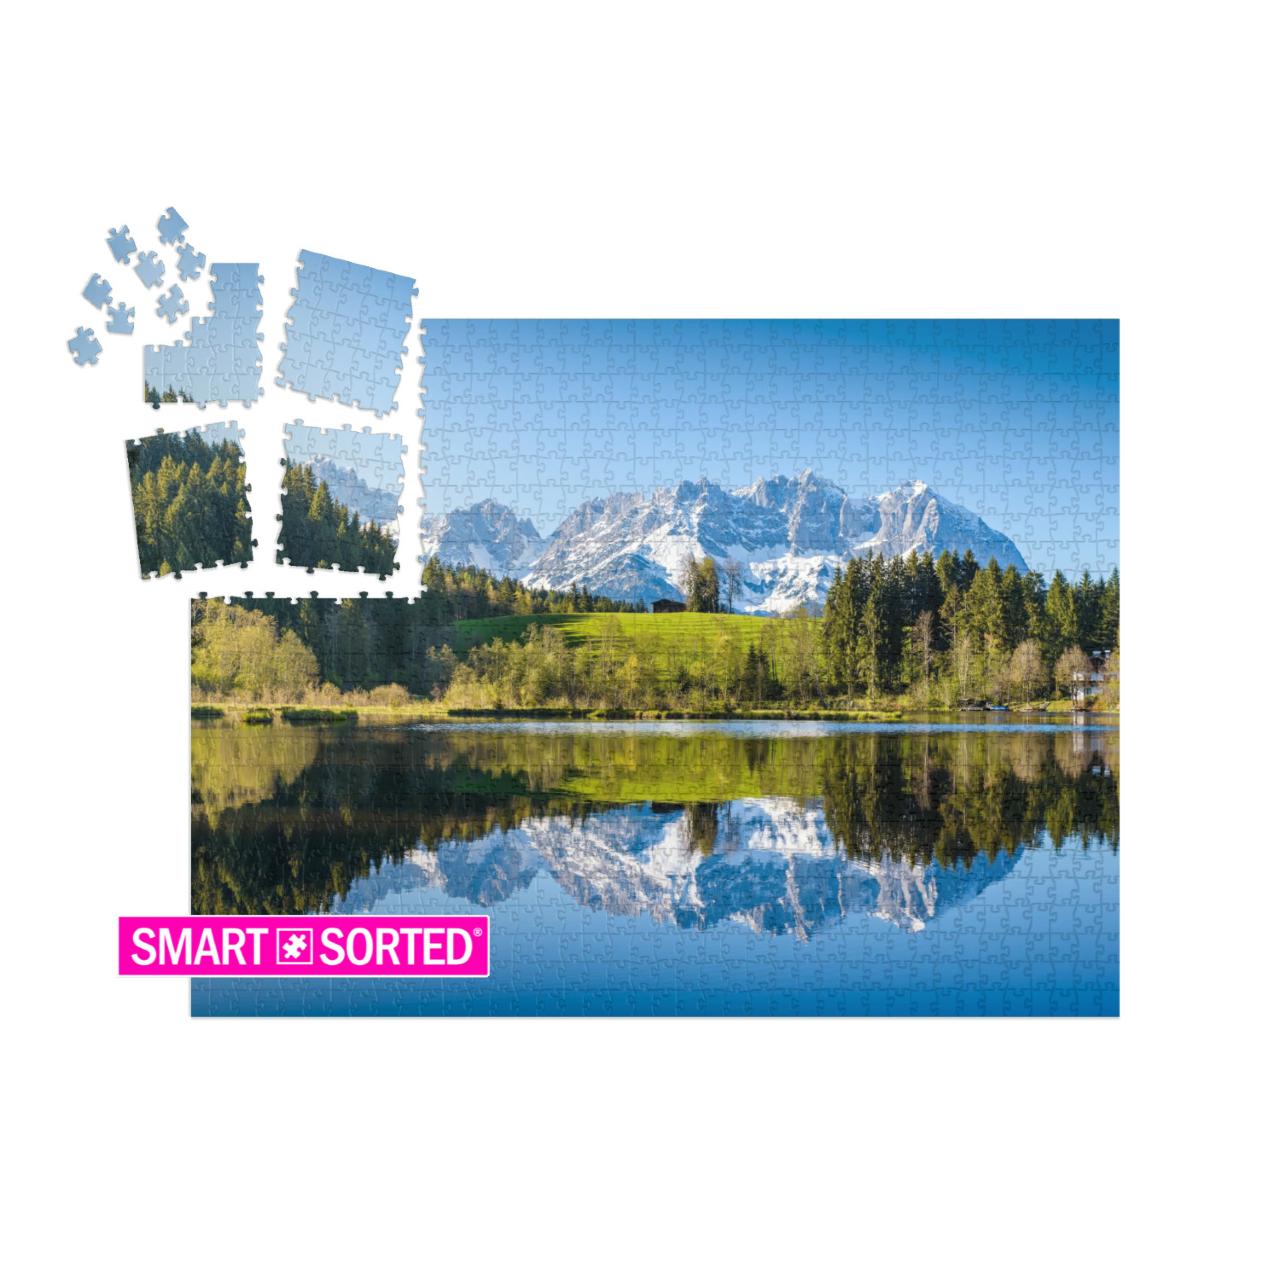 Idyllic Alpine Scenery, Snowy Mountains Mirroring in a Sm... | SMART SORTED® | Jigsaw Puzzle with 1000 pieces